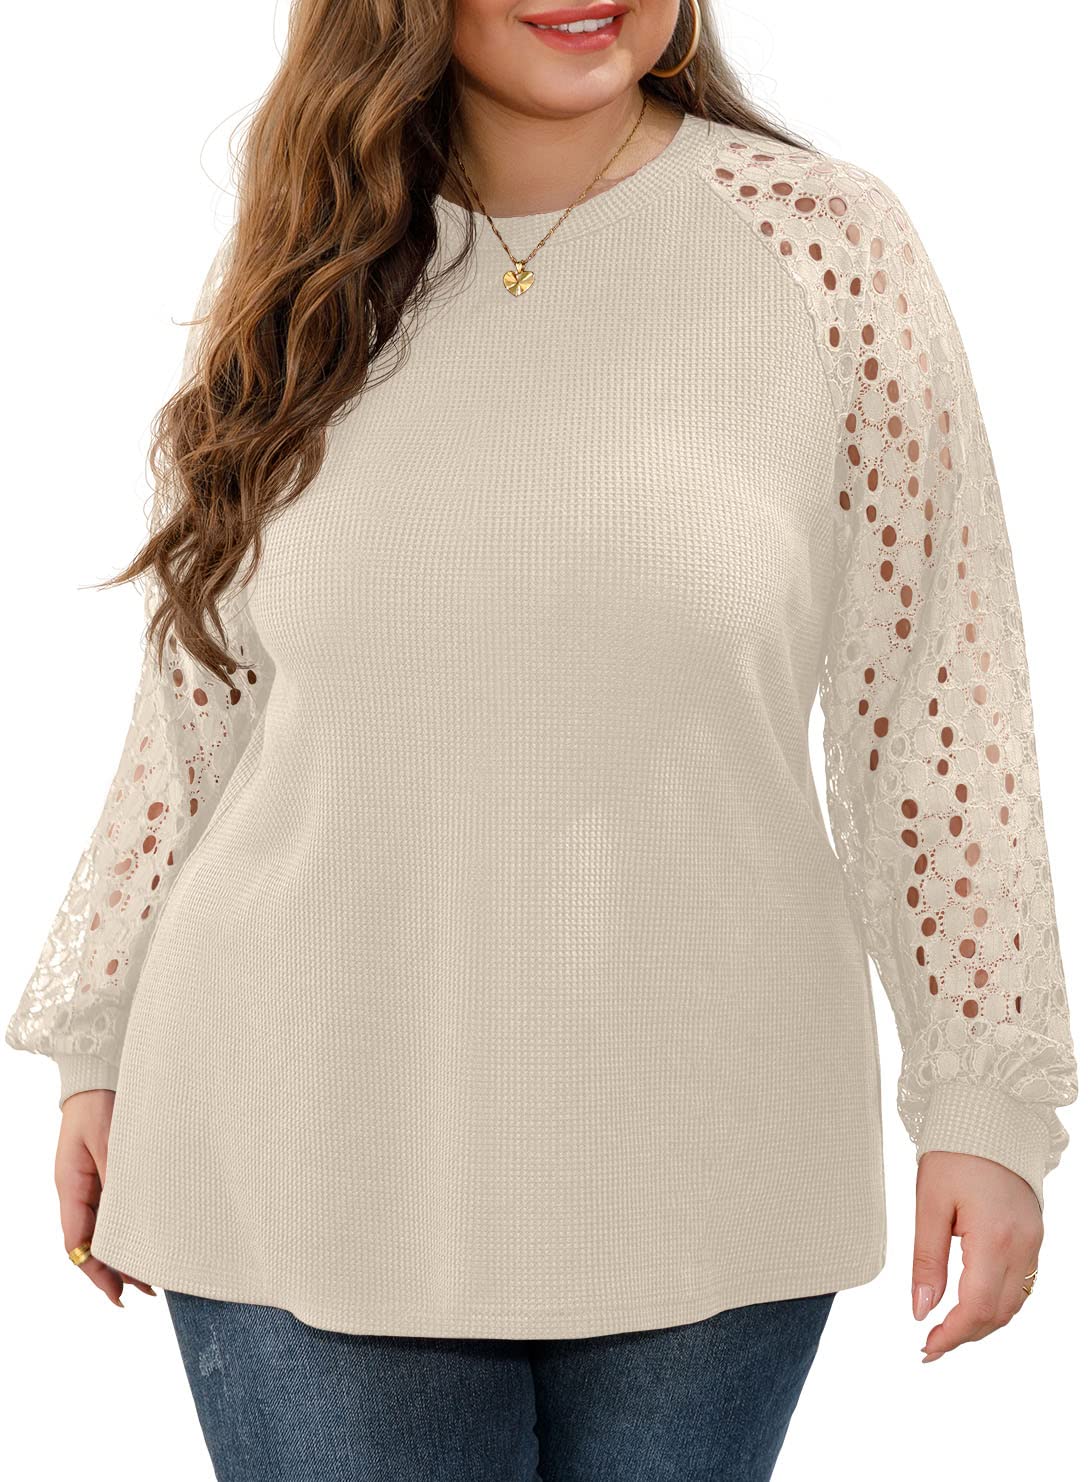 OLRIK Plus Size Tops for Women Lace Sleeve Blouse Waffle Knit